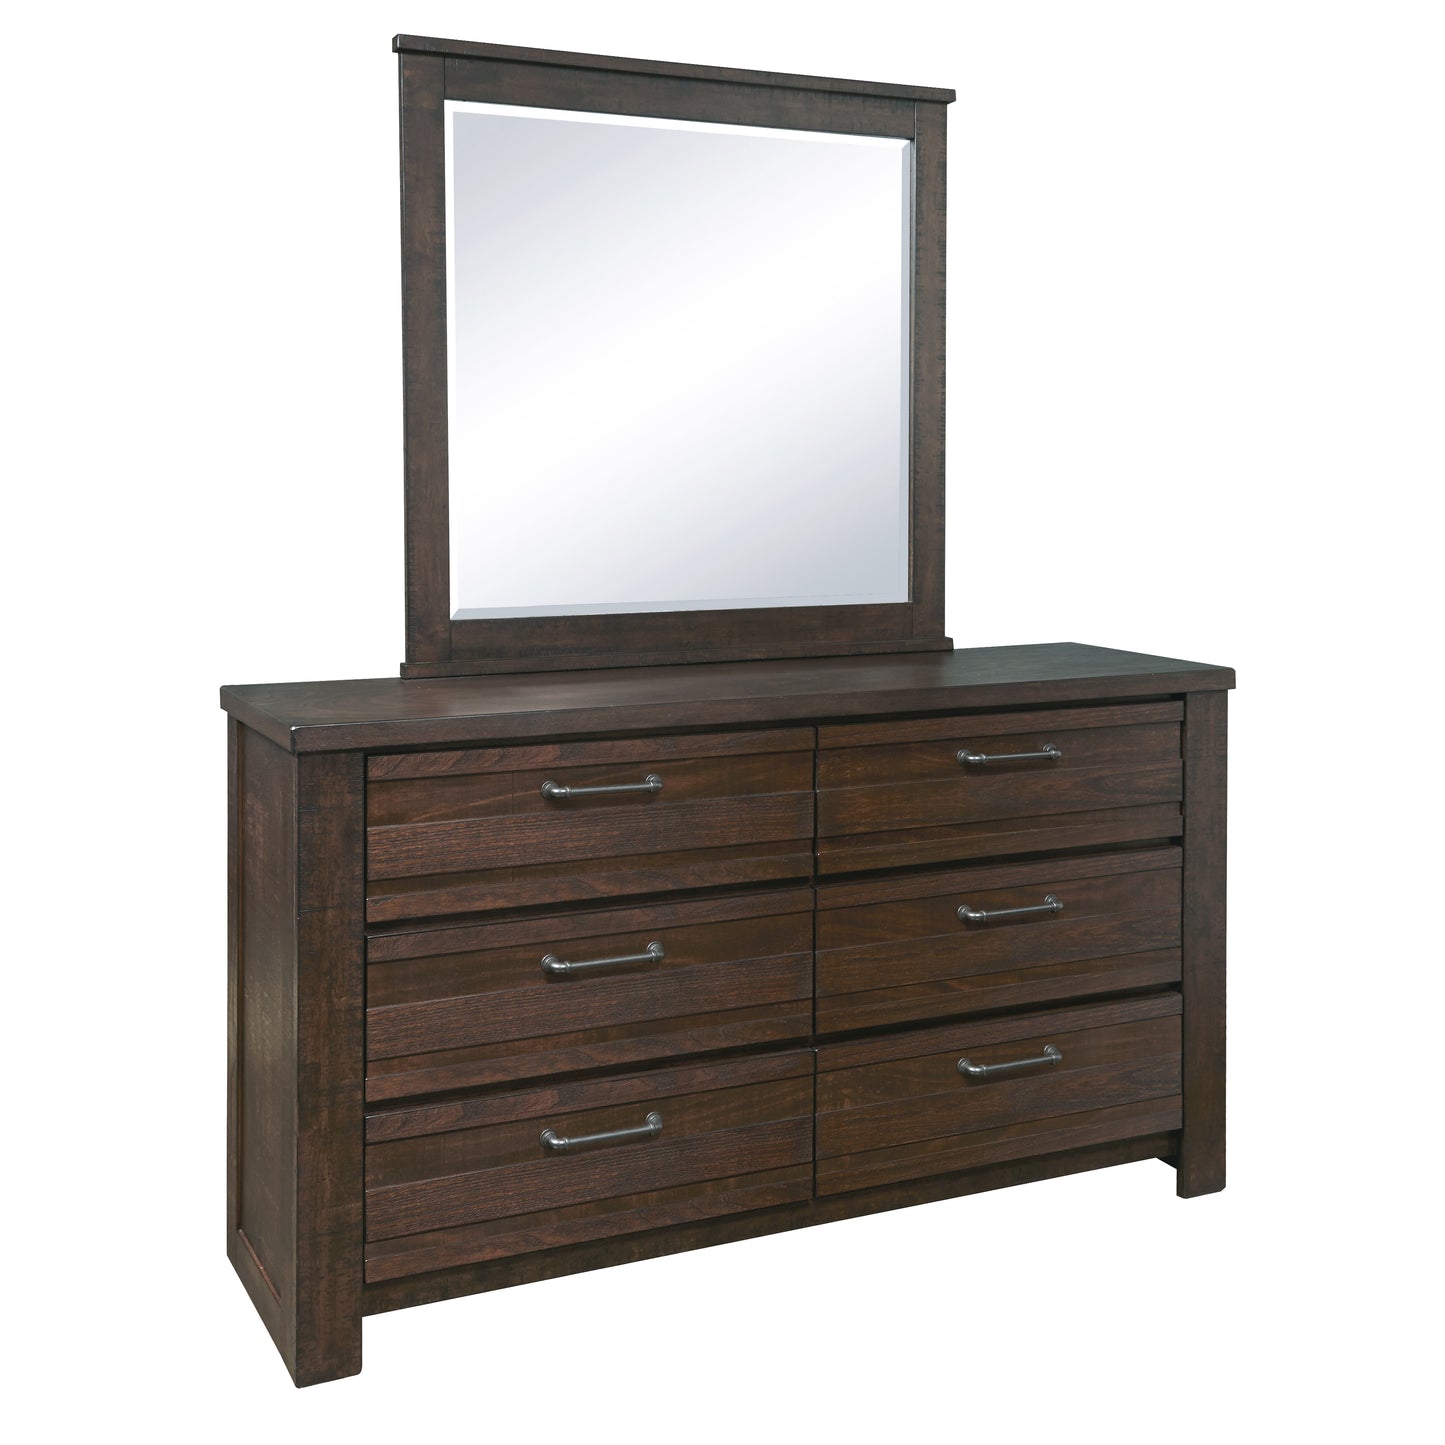 Sedona Transitional Wood 6-Drawer Dresser and Mirror in Espresso